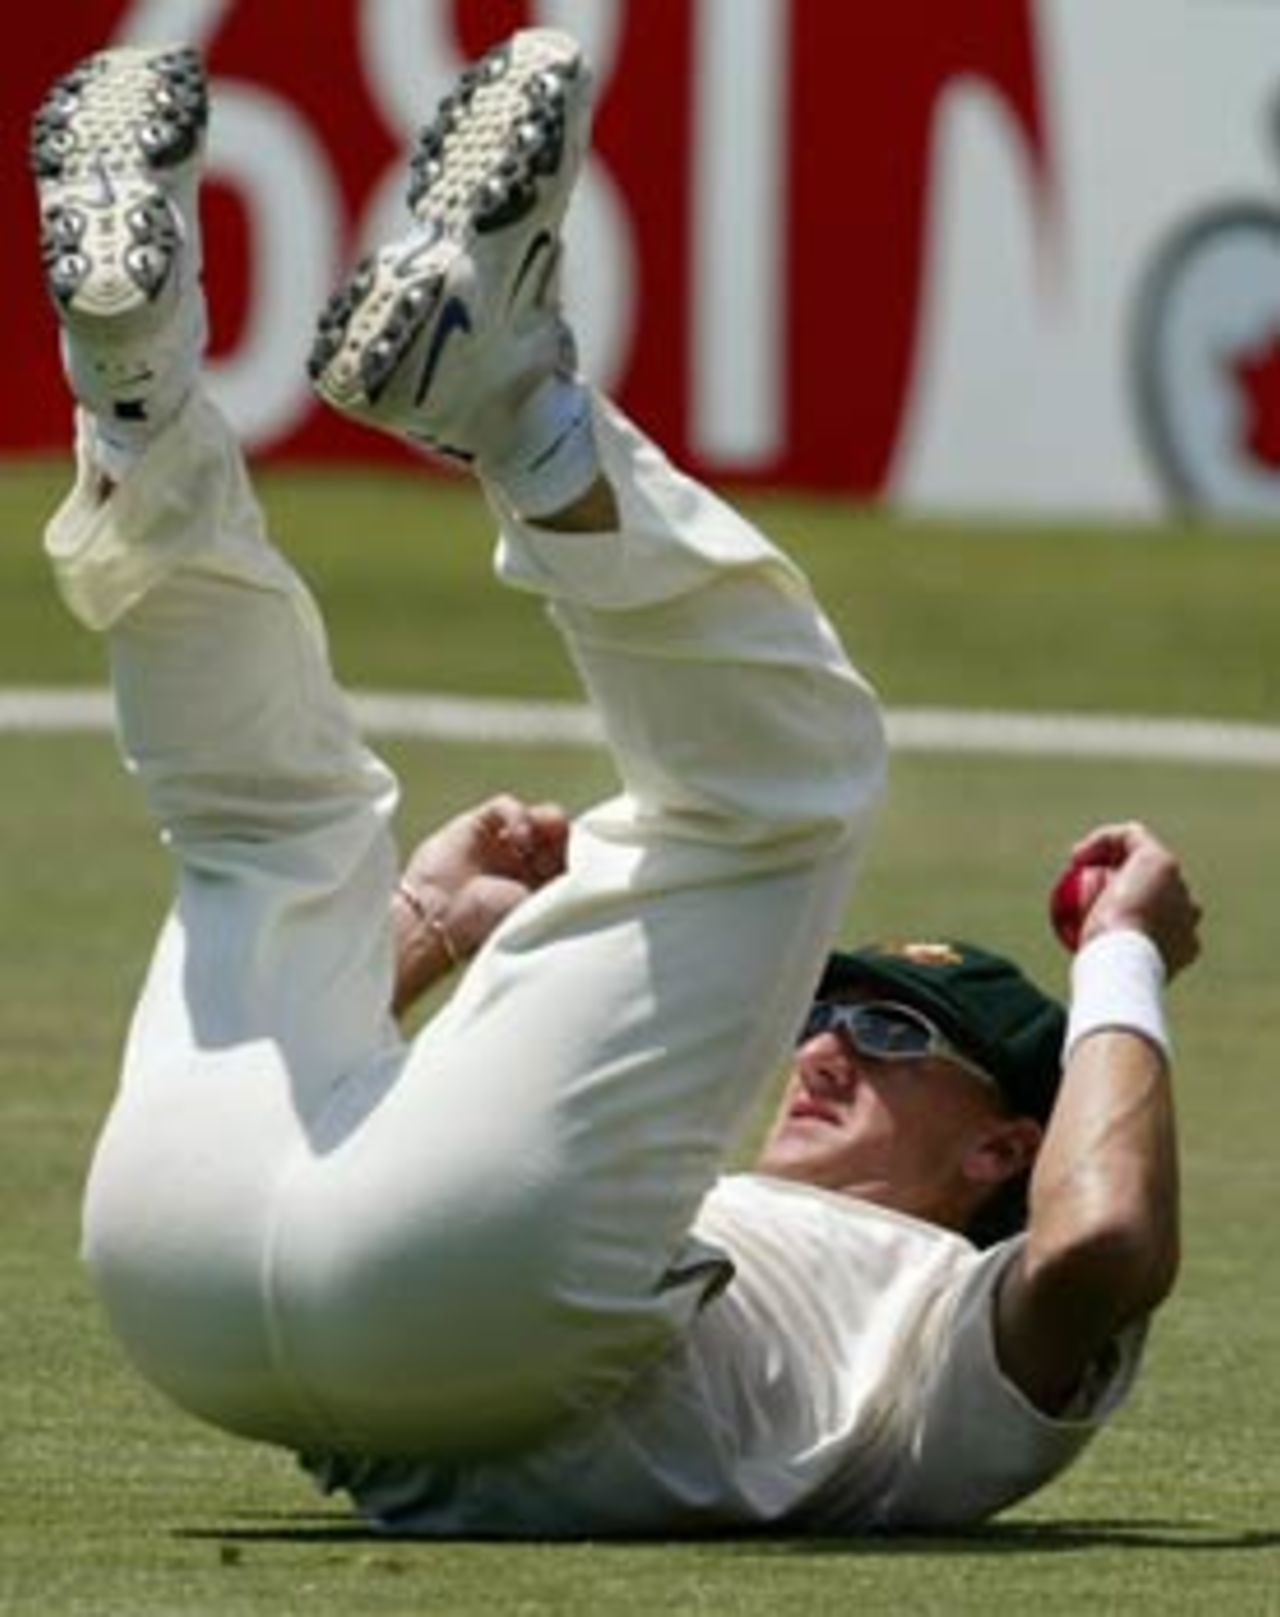 Bichel takes a stunner to end Dravid's mammoth innings, Australia v India, 2nd Test, Adelaide, 4th day, December 15, 2003